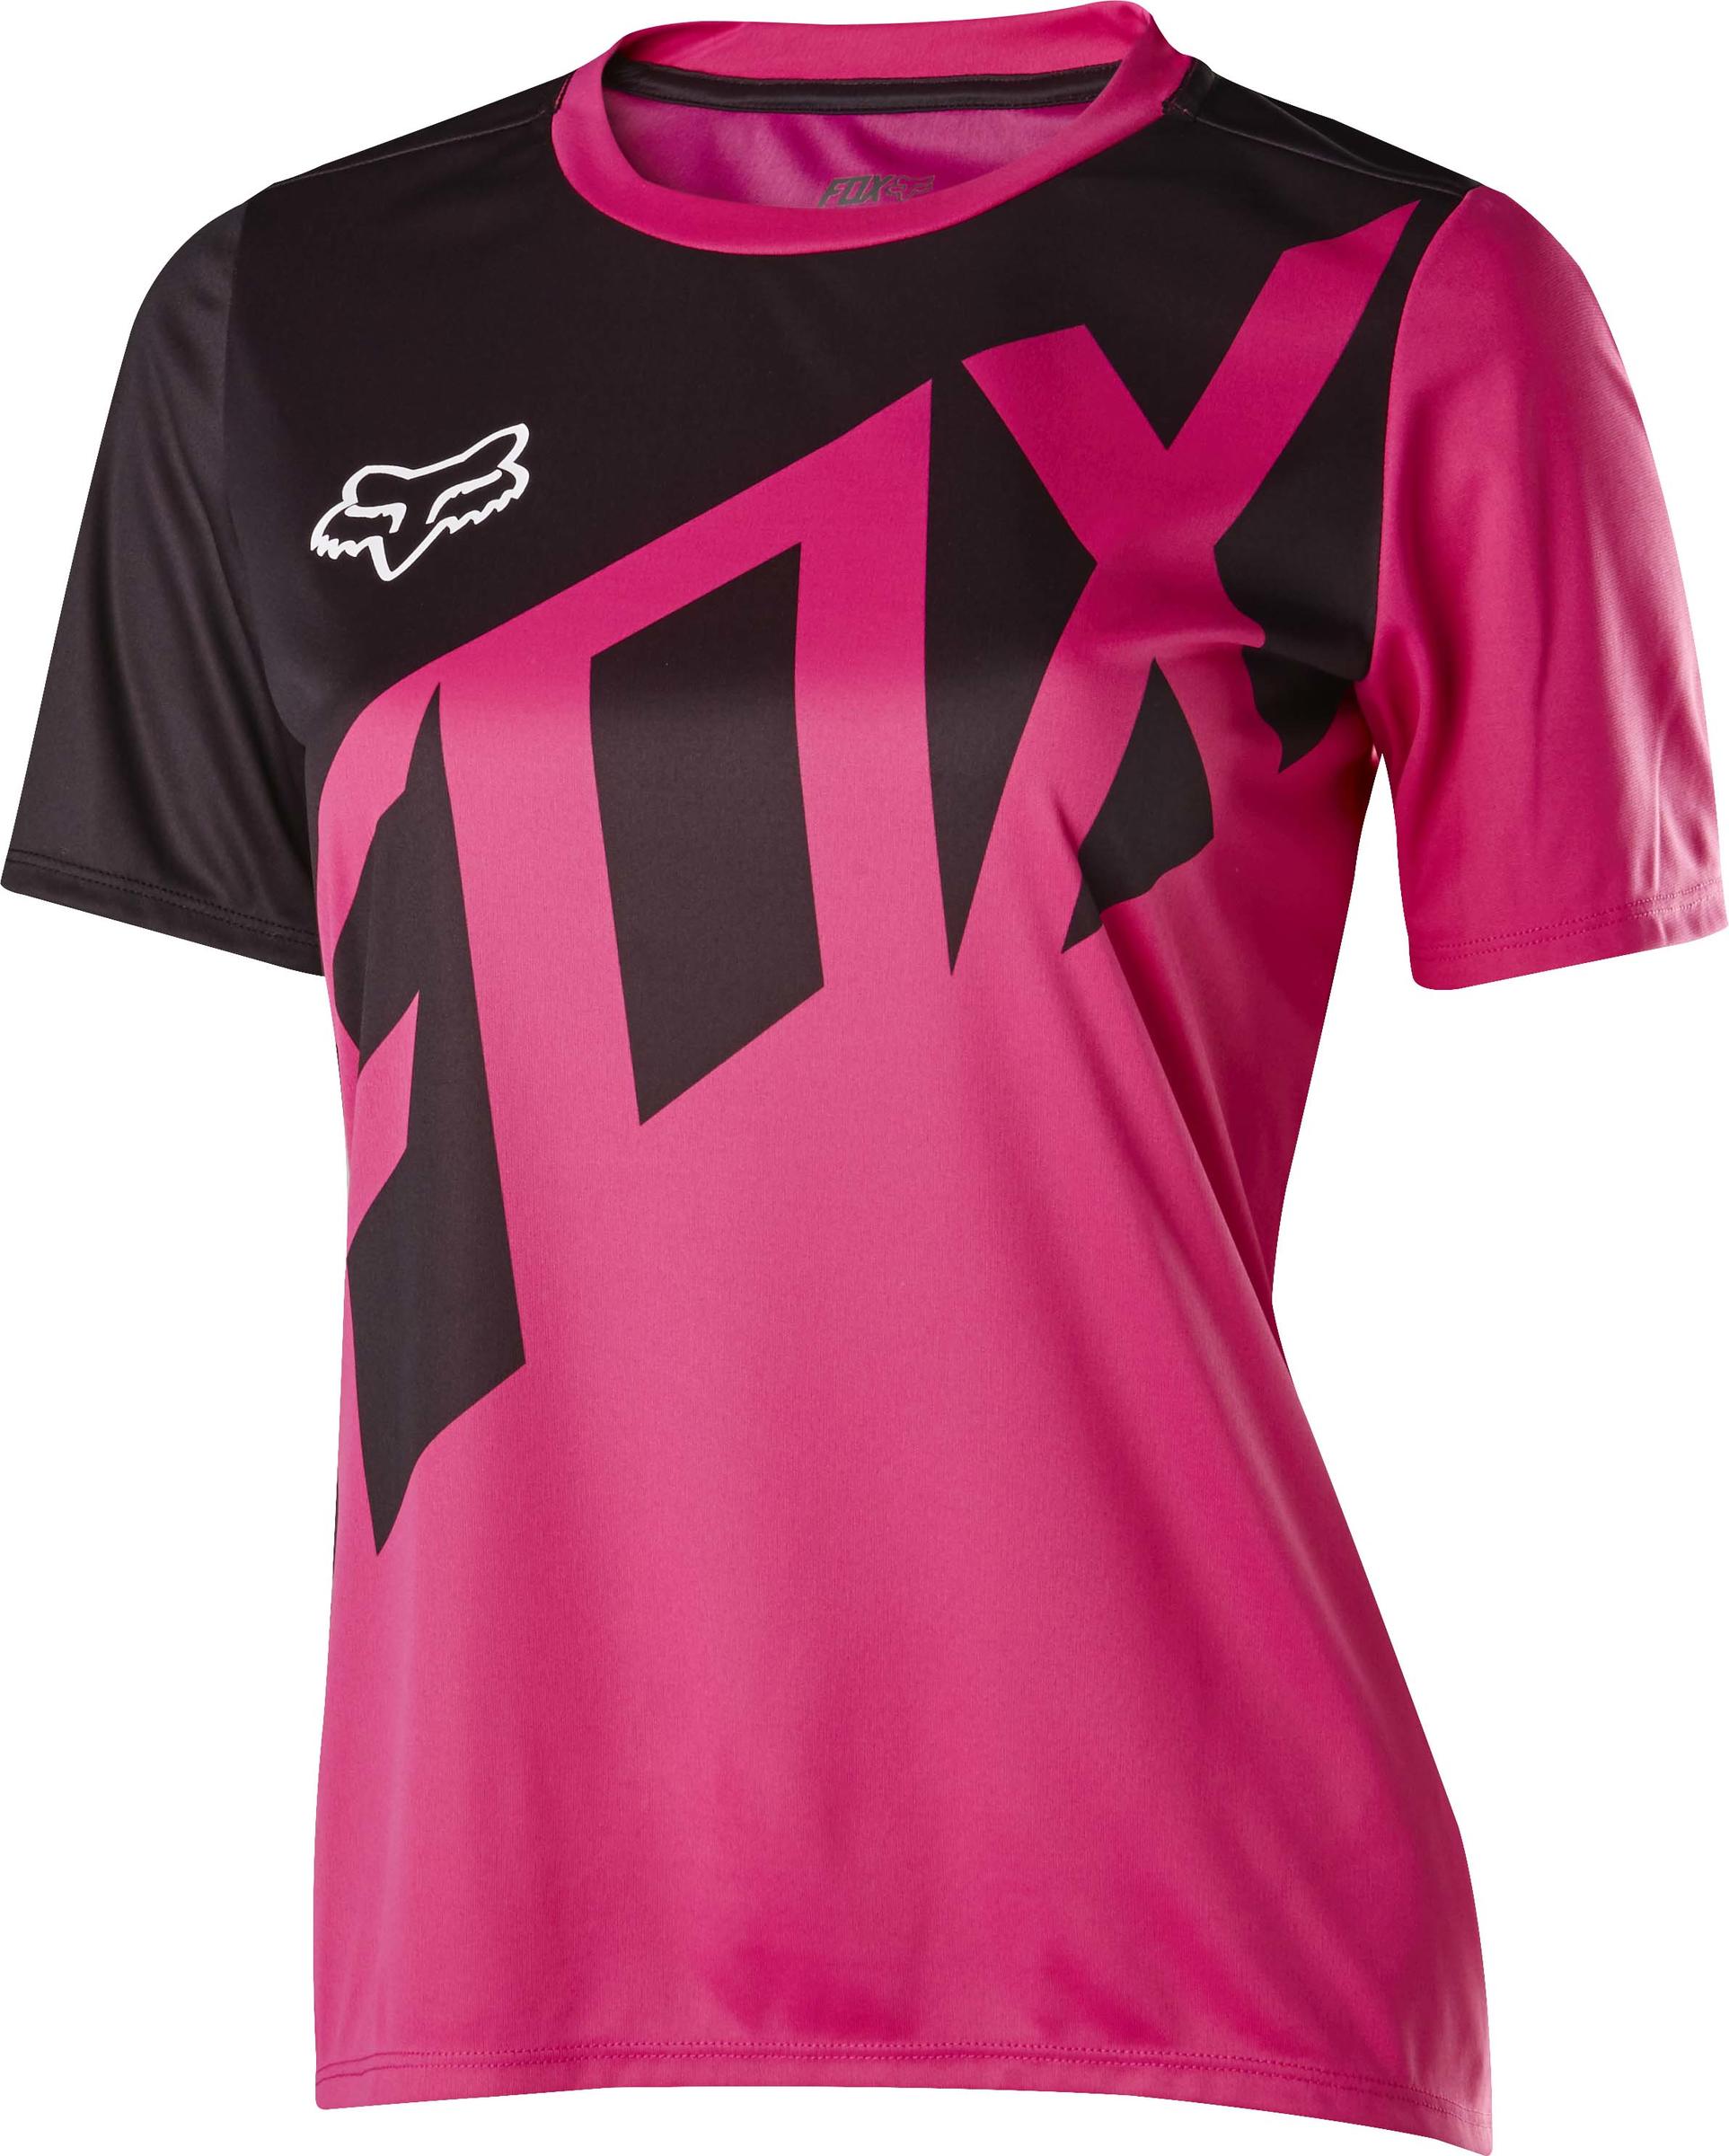 Details about   Fox Racing Womens Ripley s/s Jersey Black 